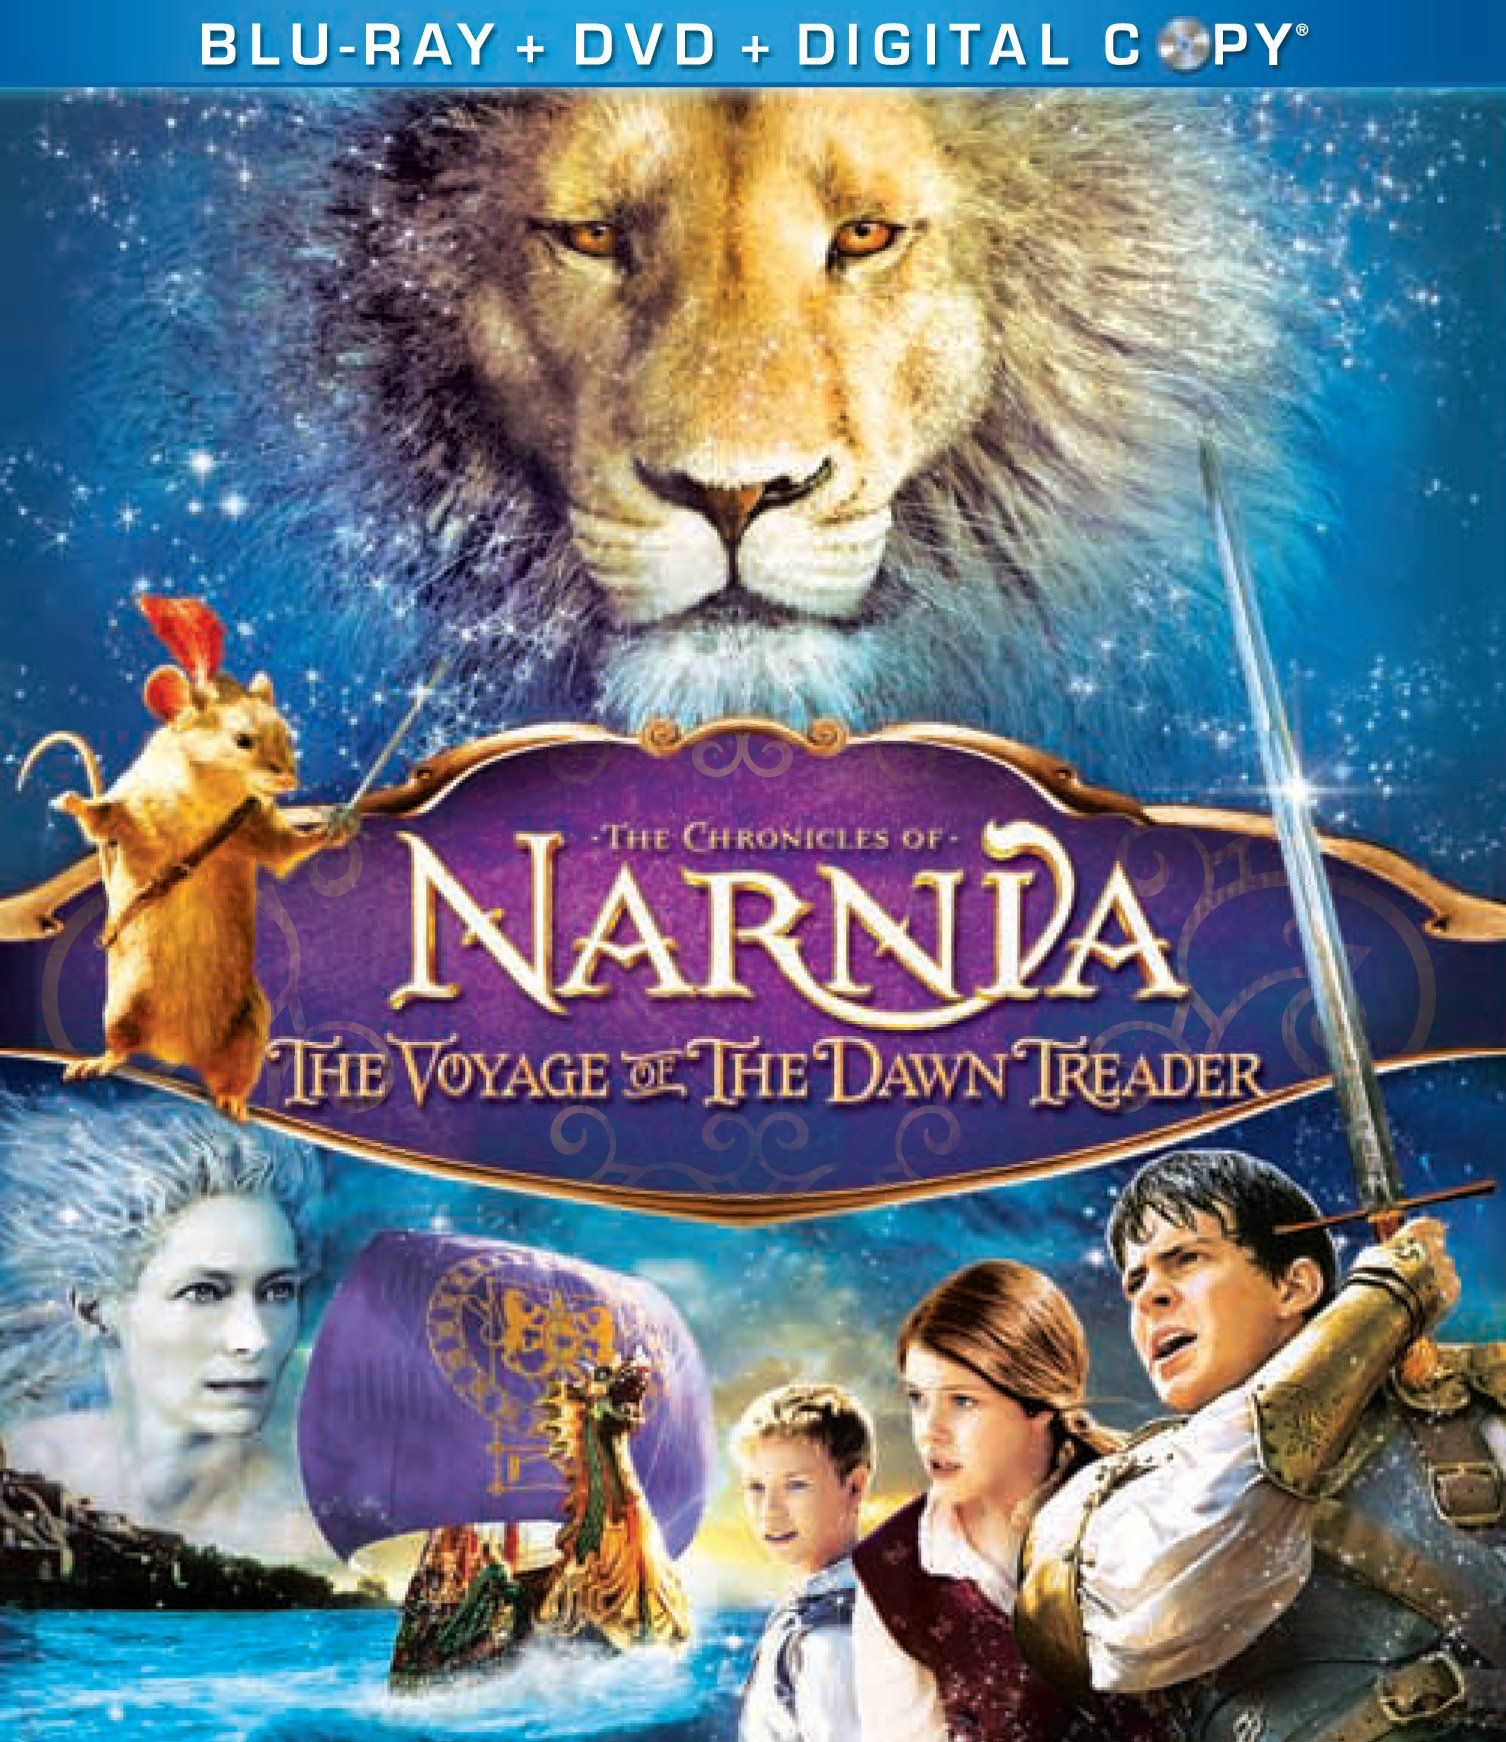 The Chronicles Of Narnia: The Voyage Of The Dawn Treader wallpaper, Movie, HQ The Chronicles Of Narnia: The Voyage Of The Dawn Treader pictureK Wallpaper 2019